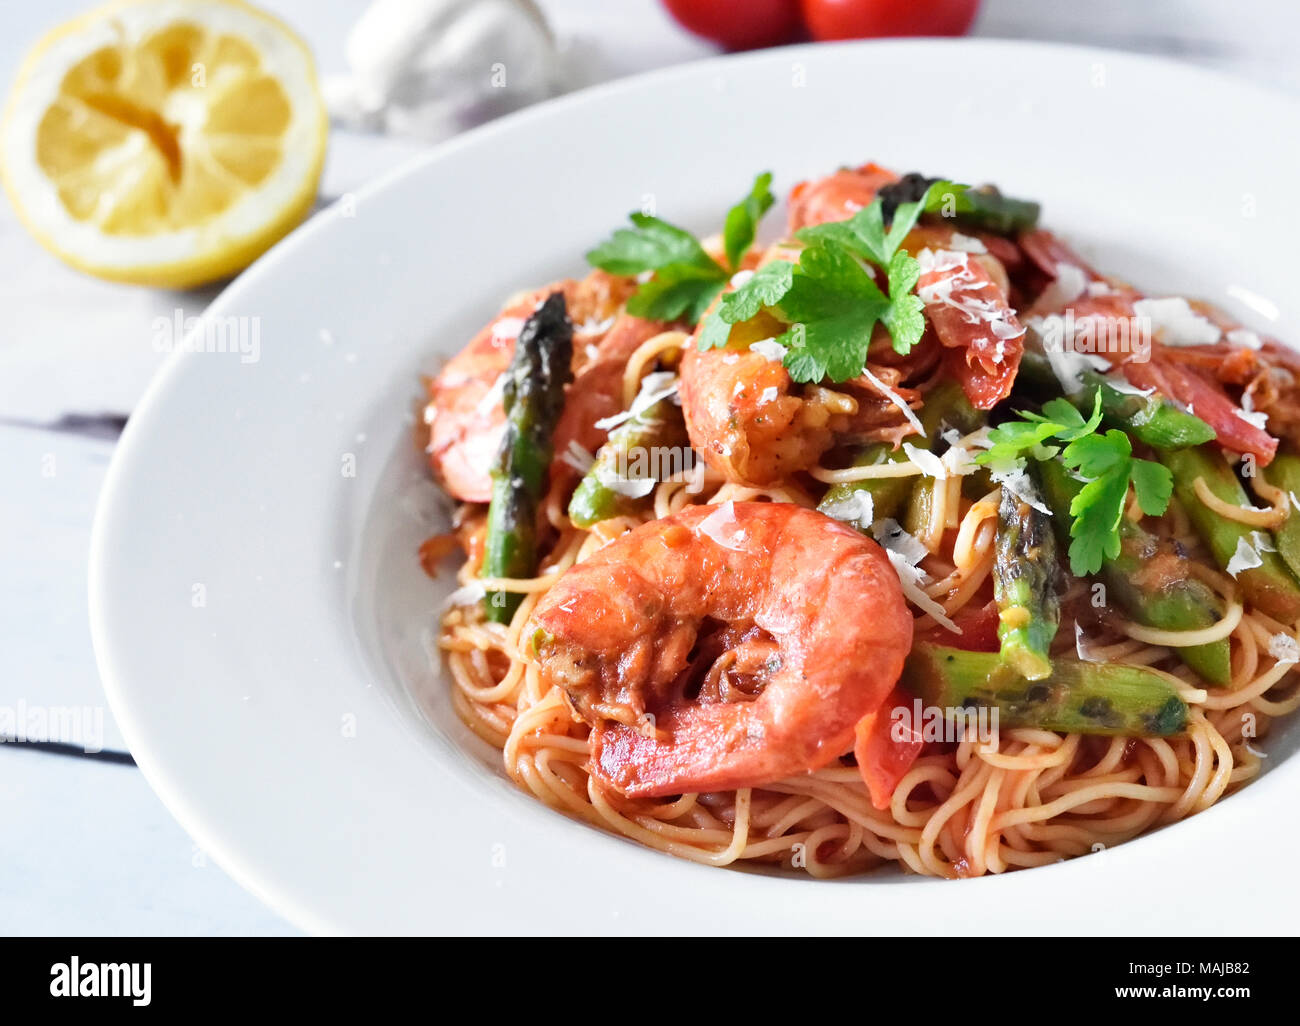 Spaghetti frutti di mare or pasta dish with shrimps and green asparagus and parsley garnish. White plate on a wooden table, healthy eating scene. Stock Photo